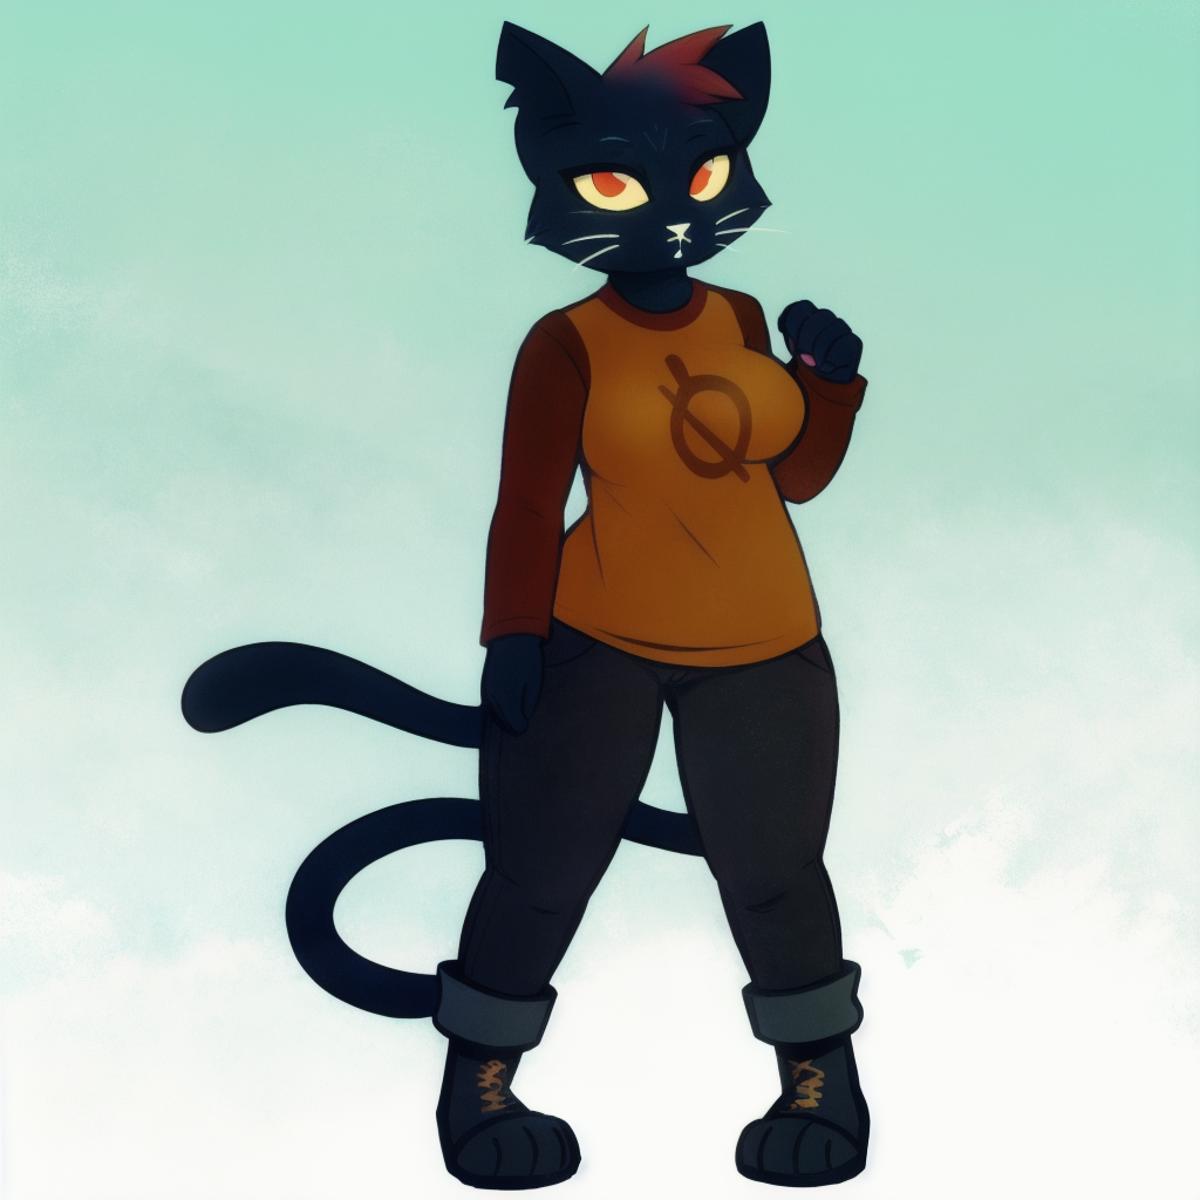 Mae Borowski (Night In The Woods) image by FauxAndCroe